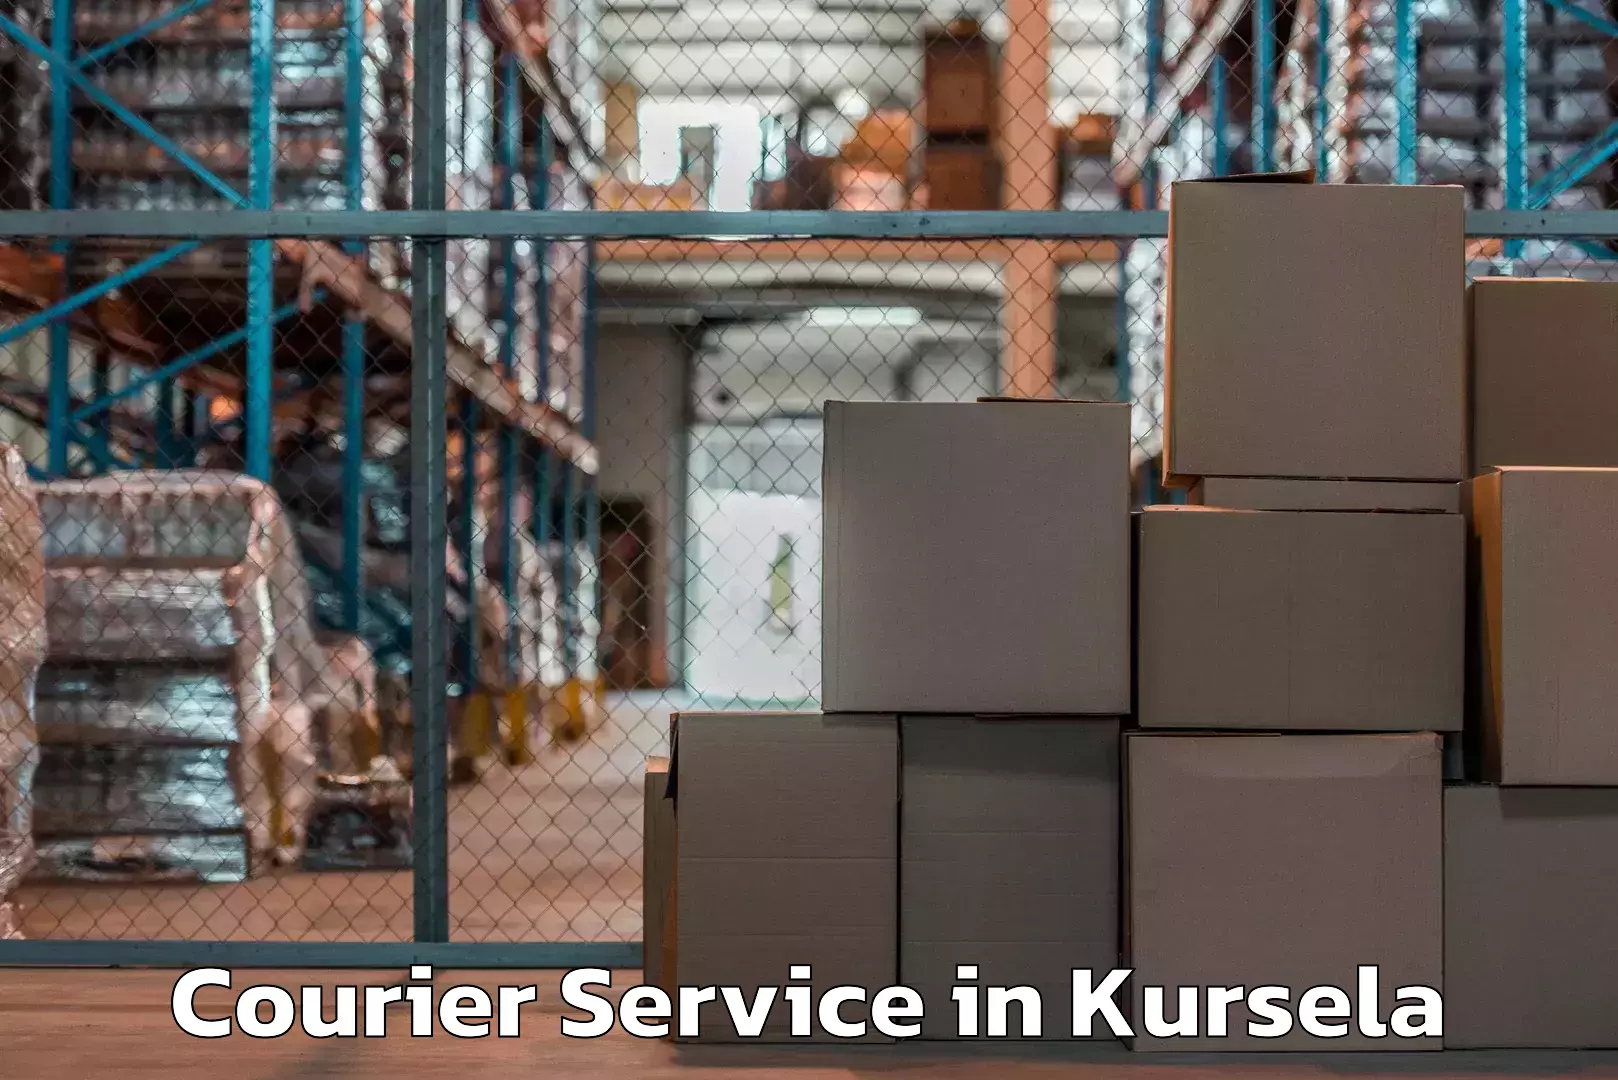 Full-service courier options in Kursela